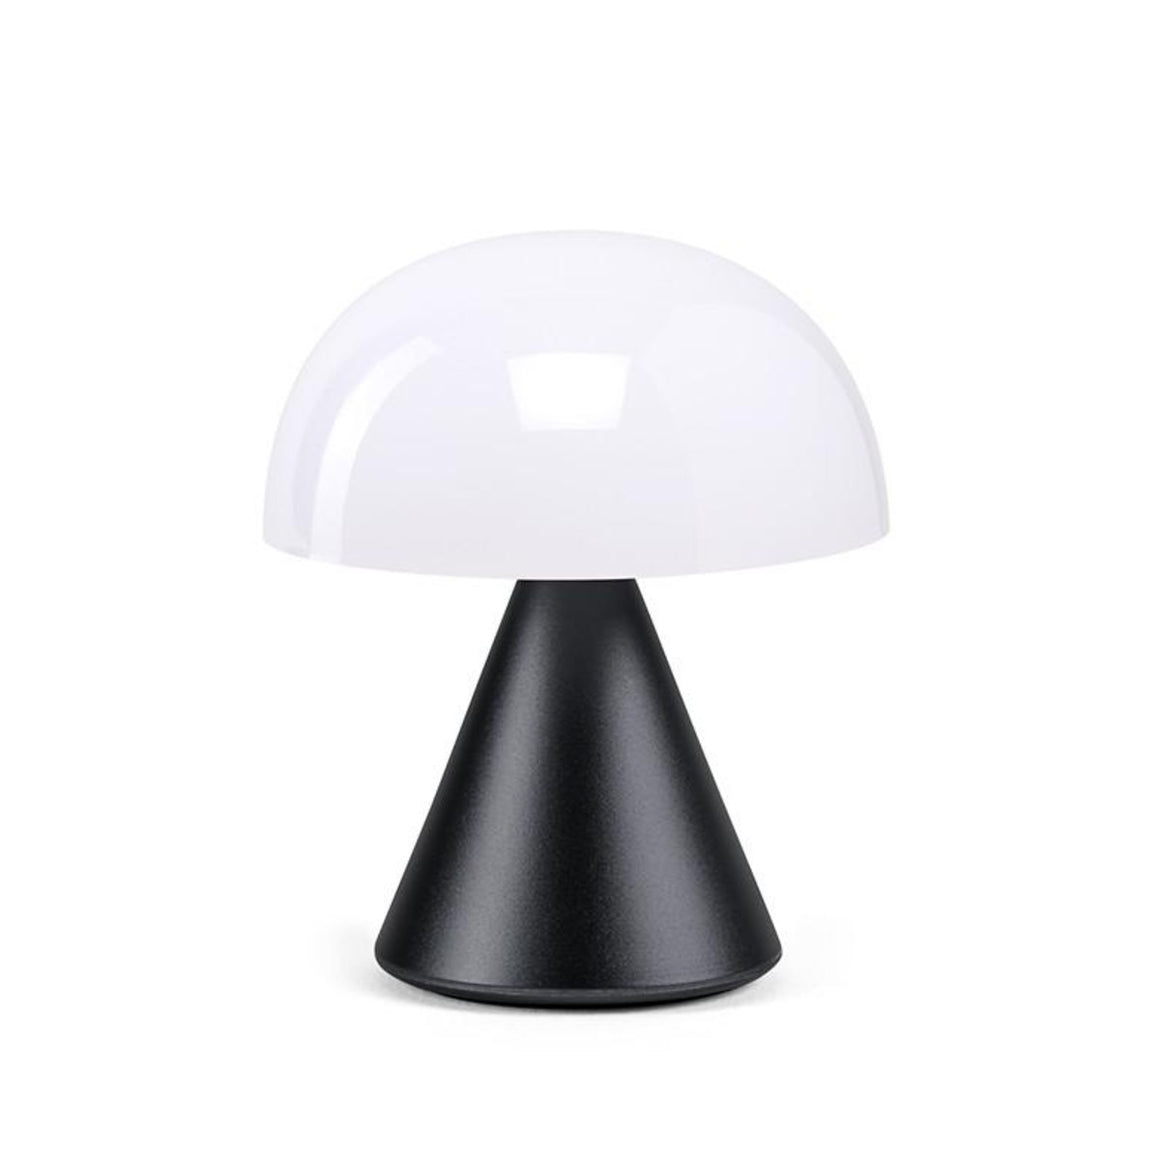 White dome light with a conical gun mental base.